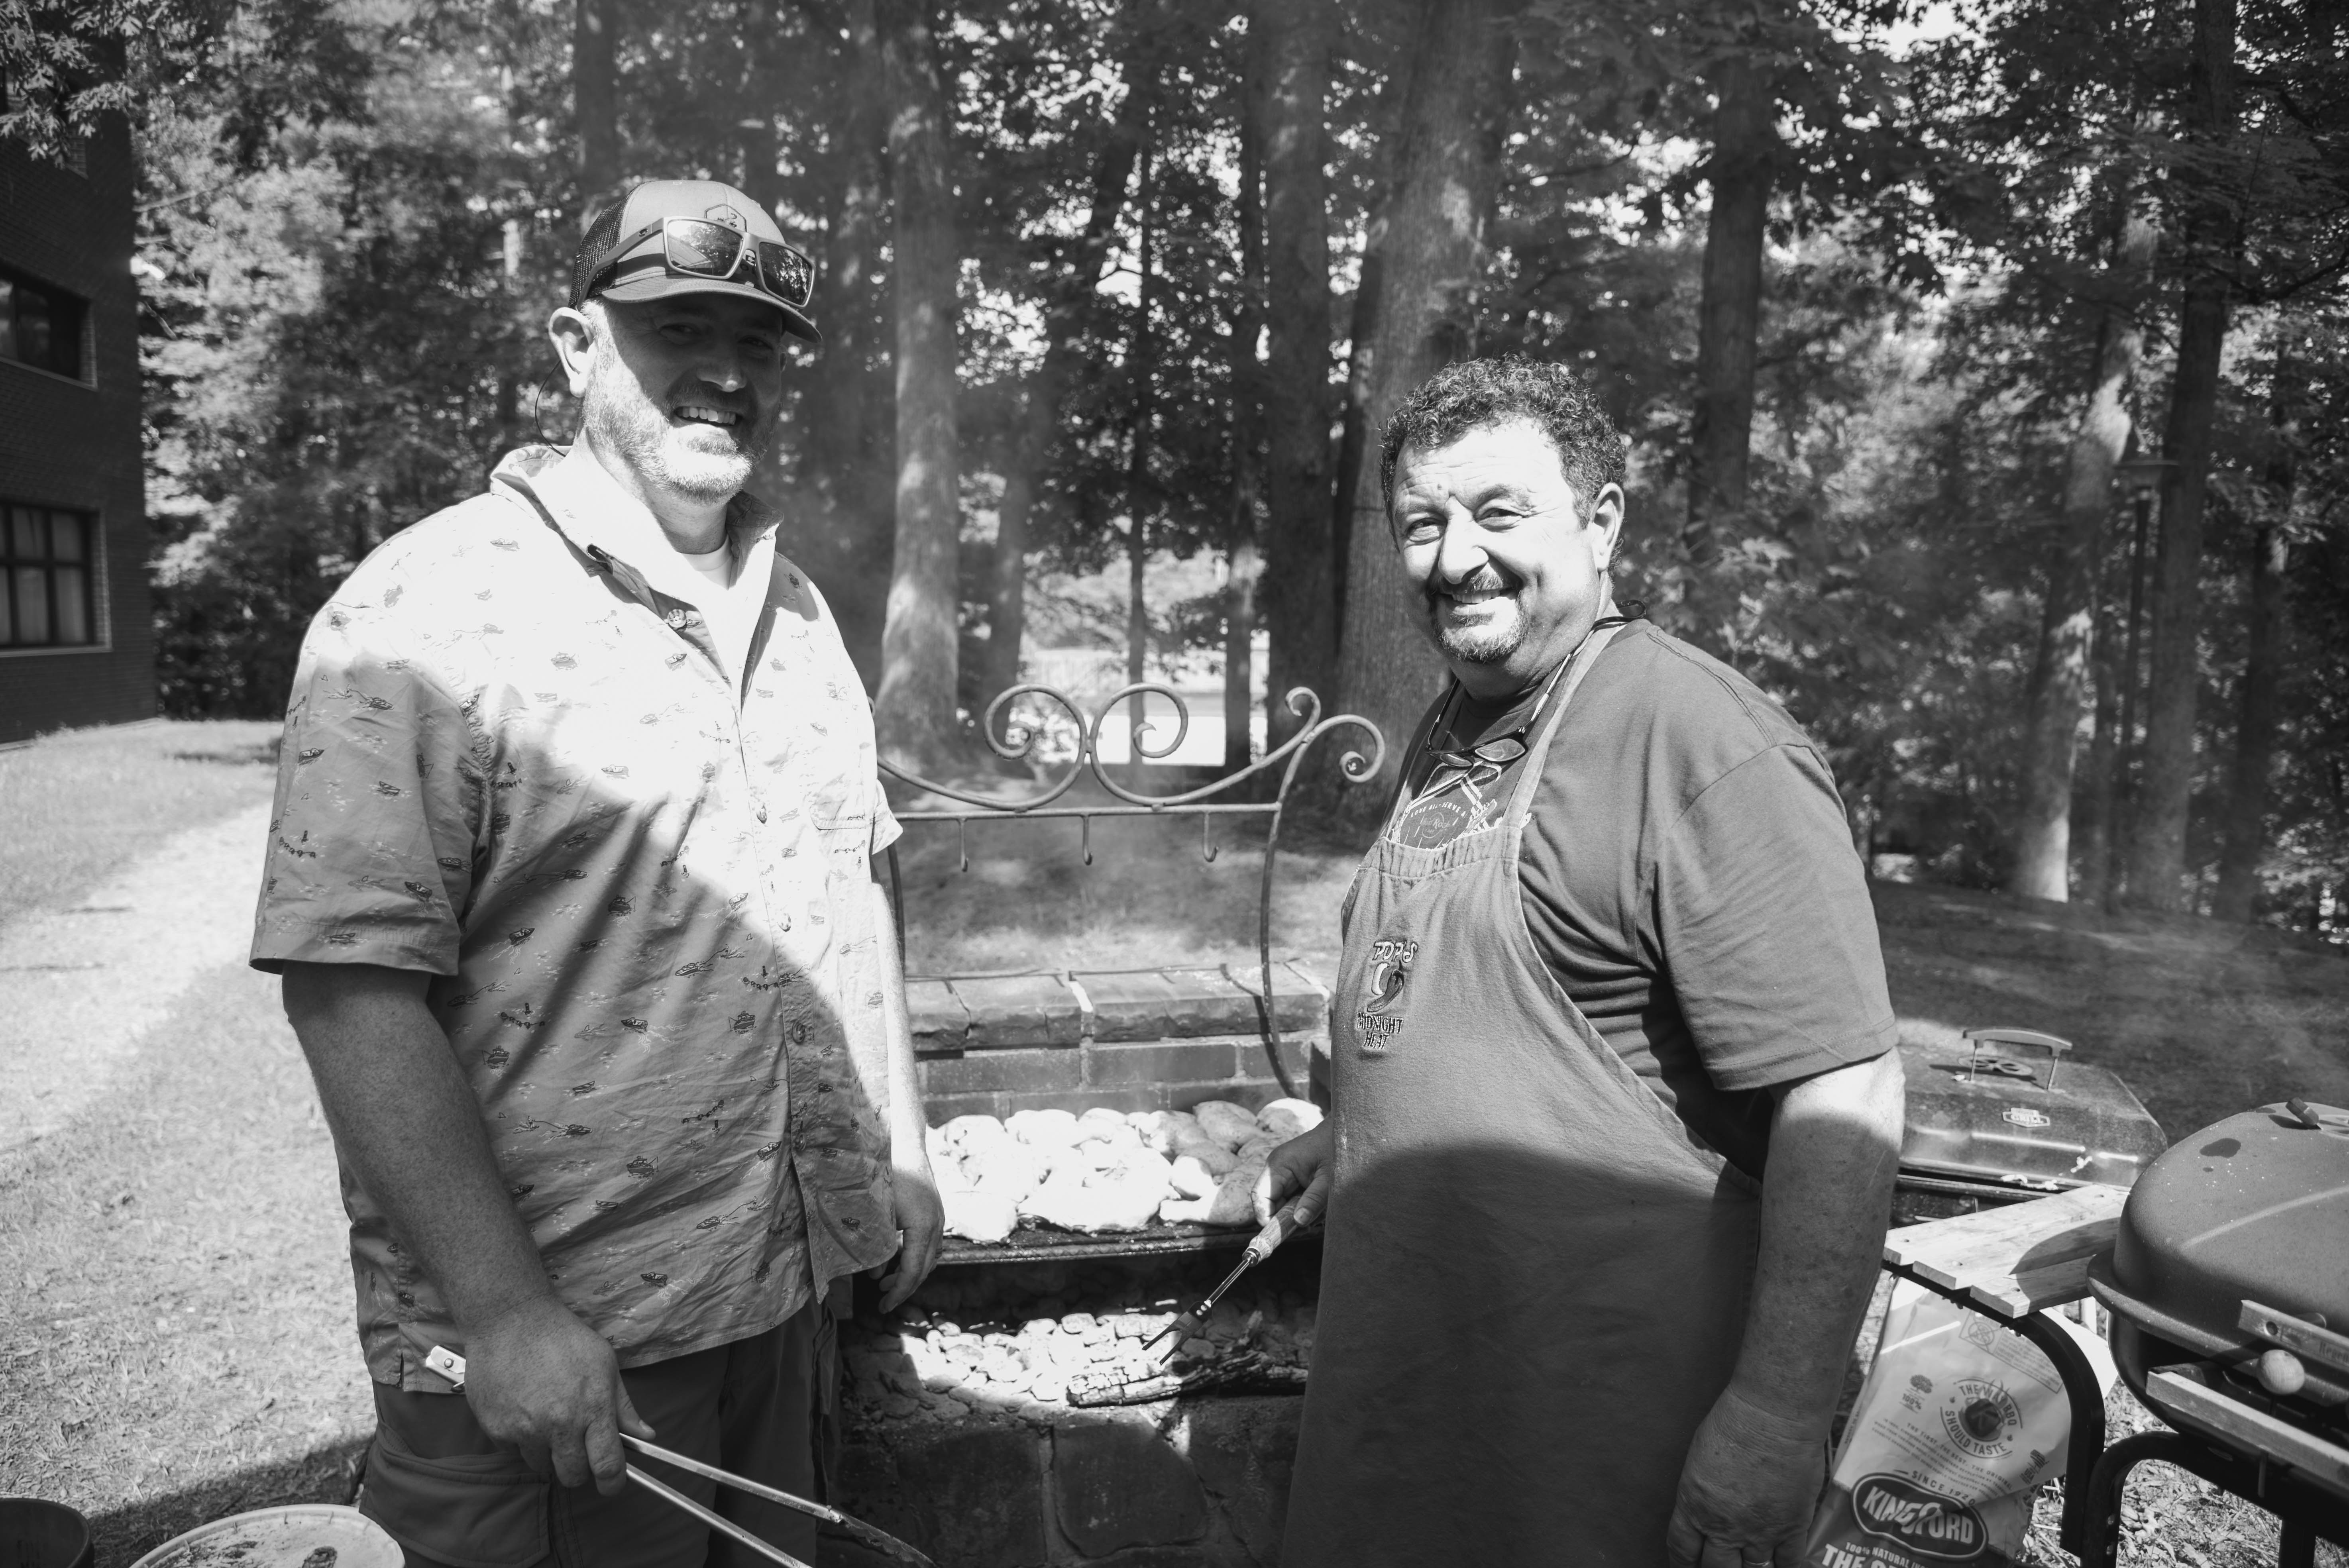 Cooking over Fire with Greg Brown